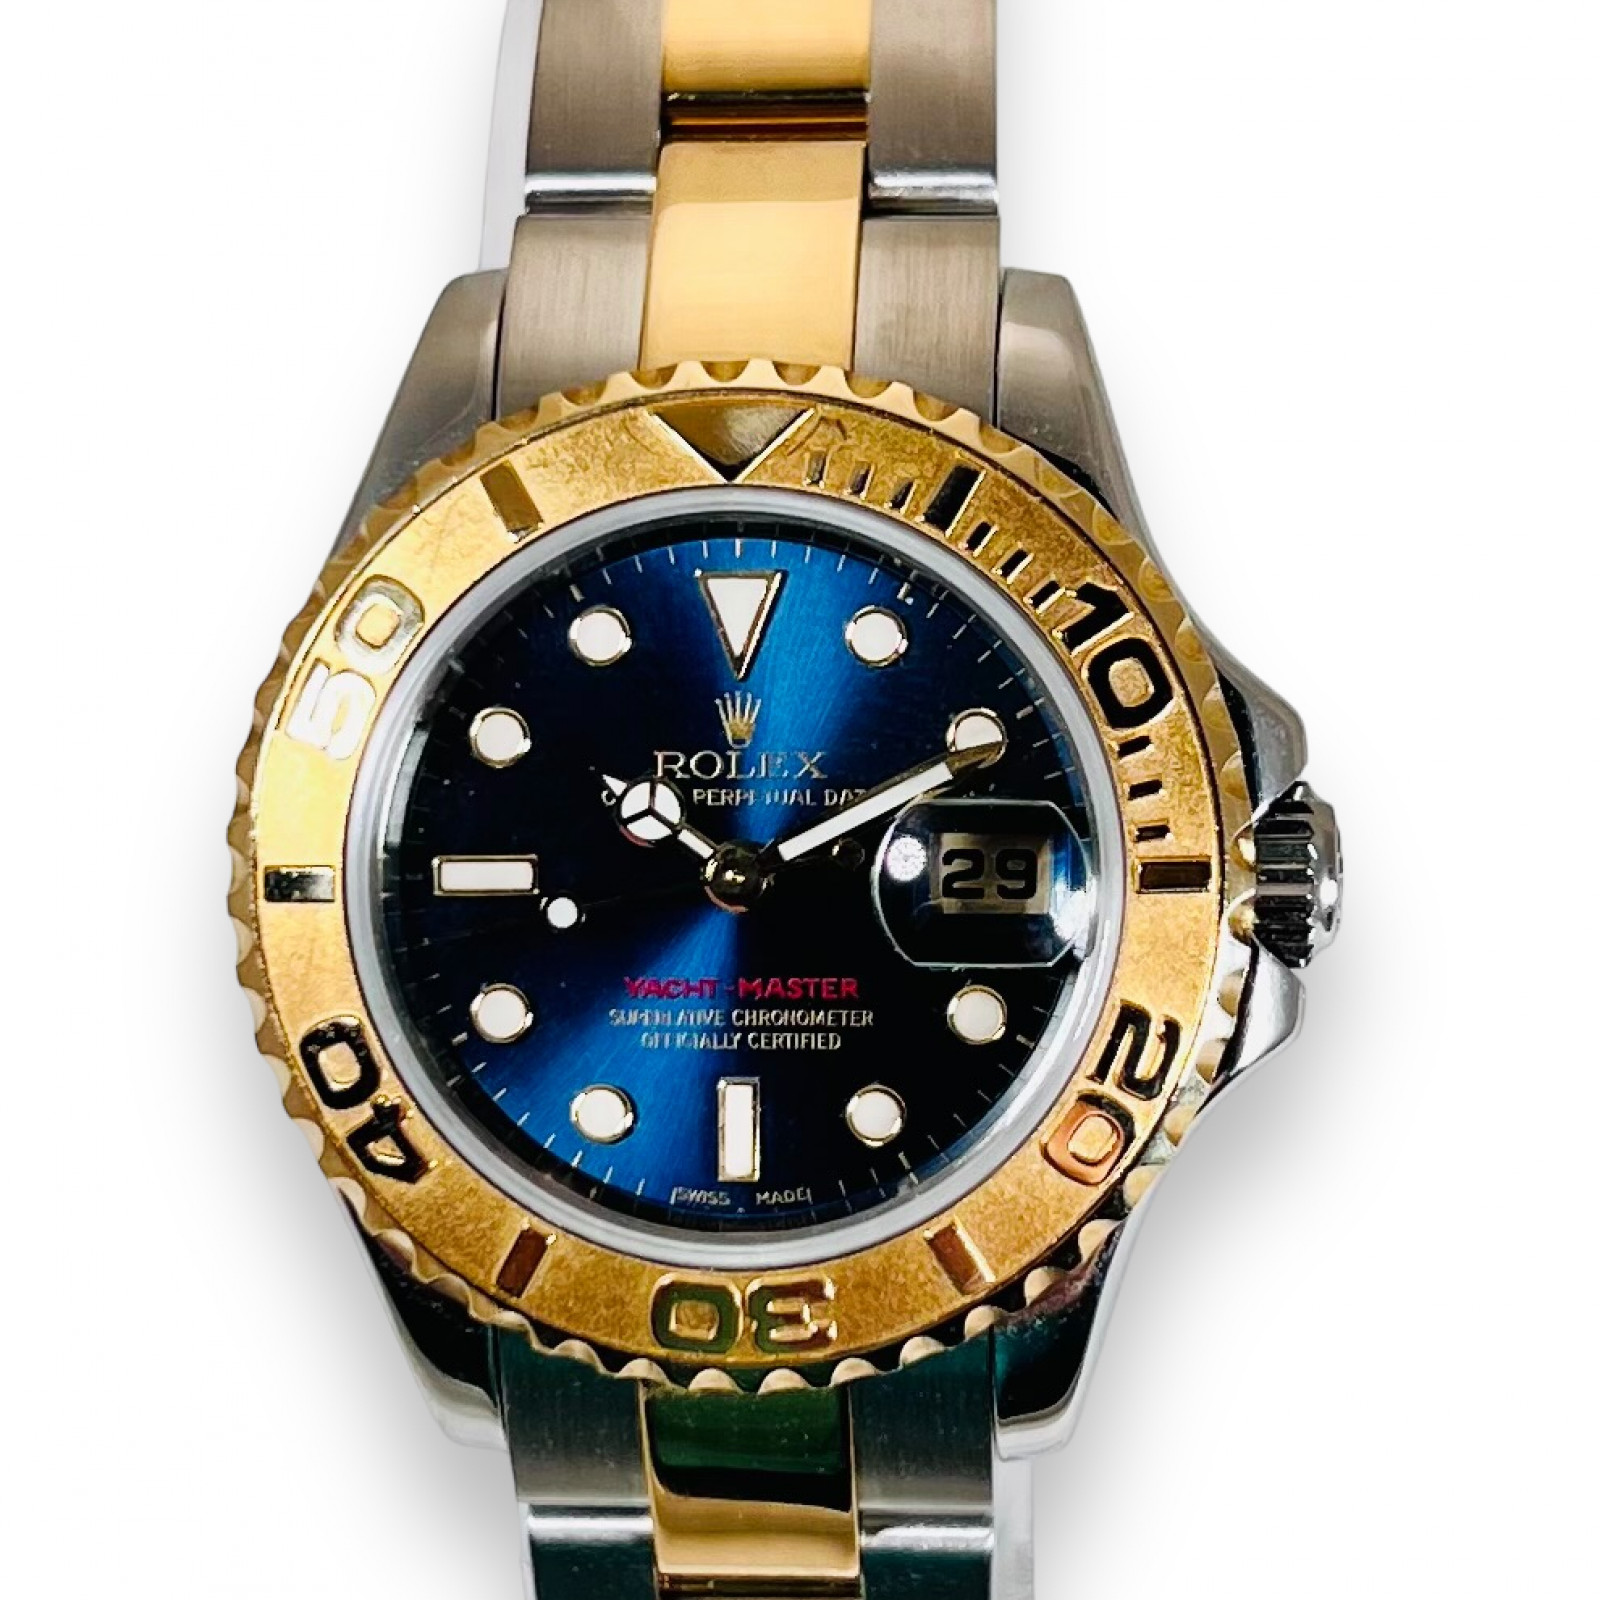 Ladies Rolex Yacht-Master at Ermitage Jewelers